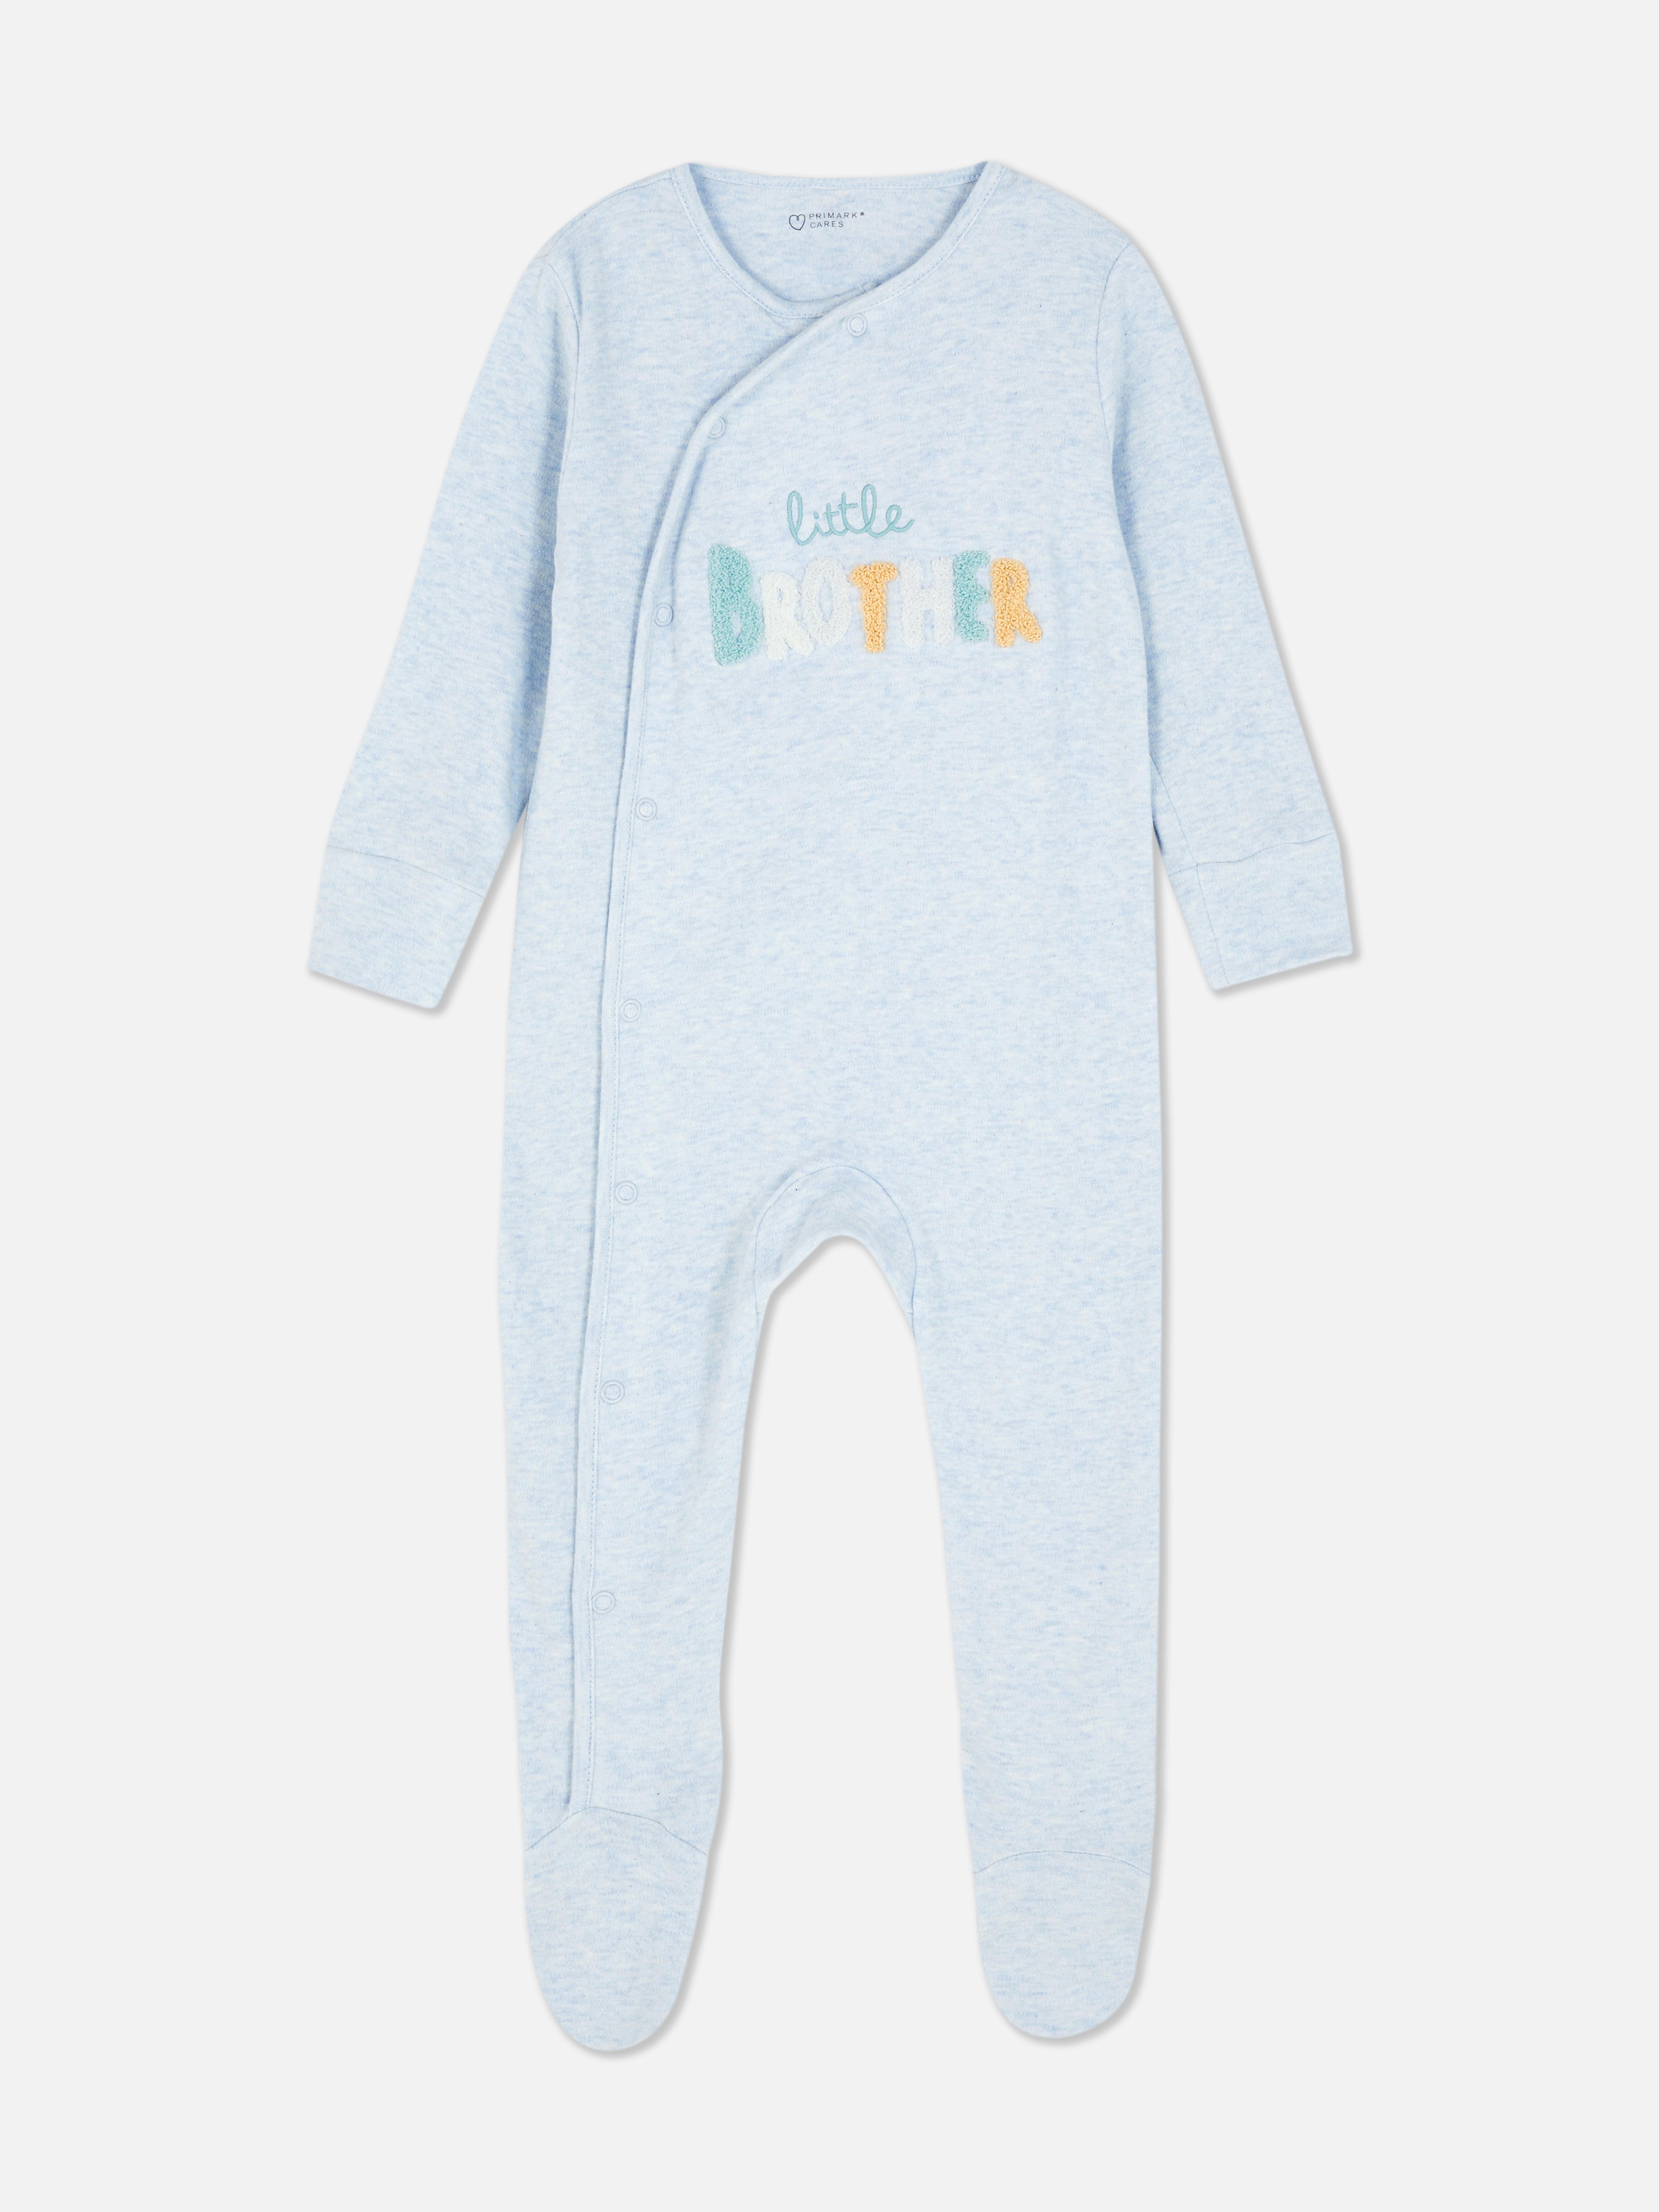 Little Brother Embroidered Sleepsuit